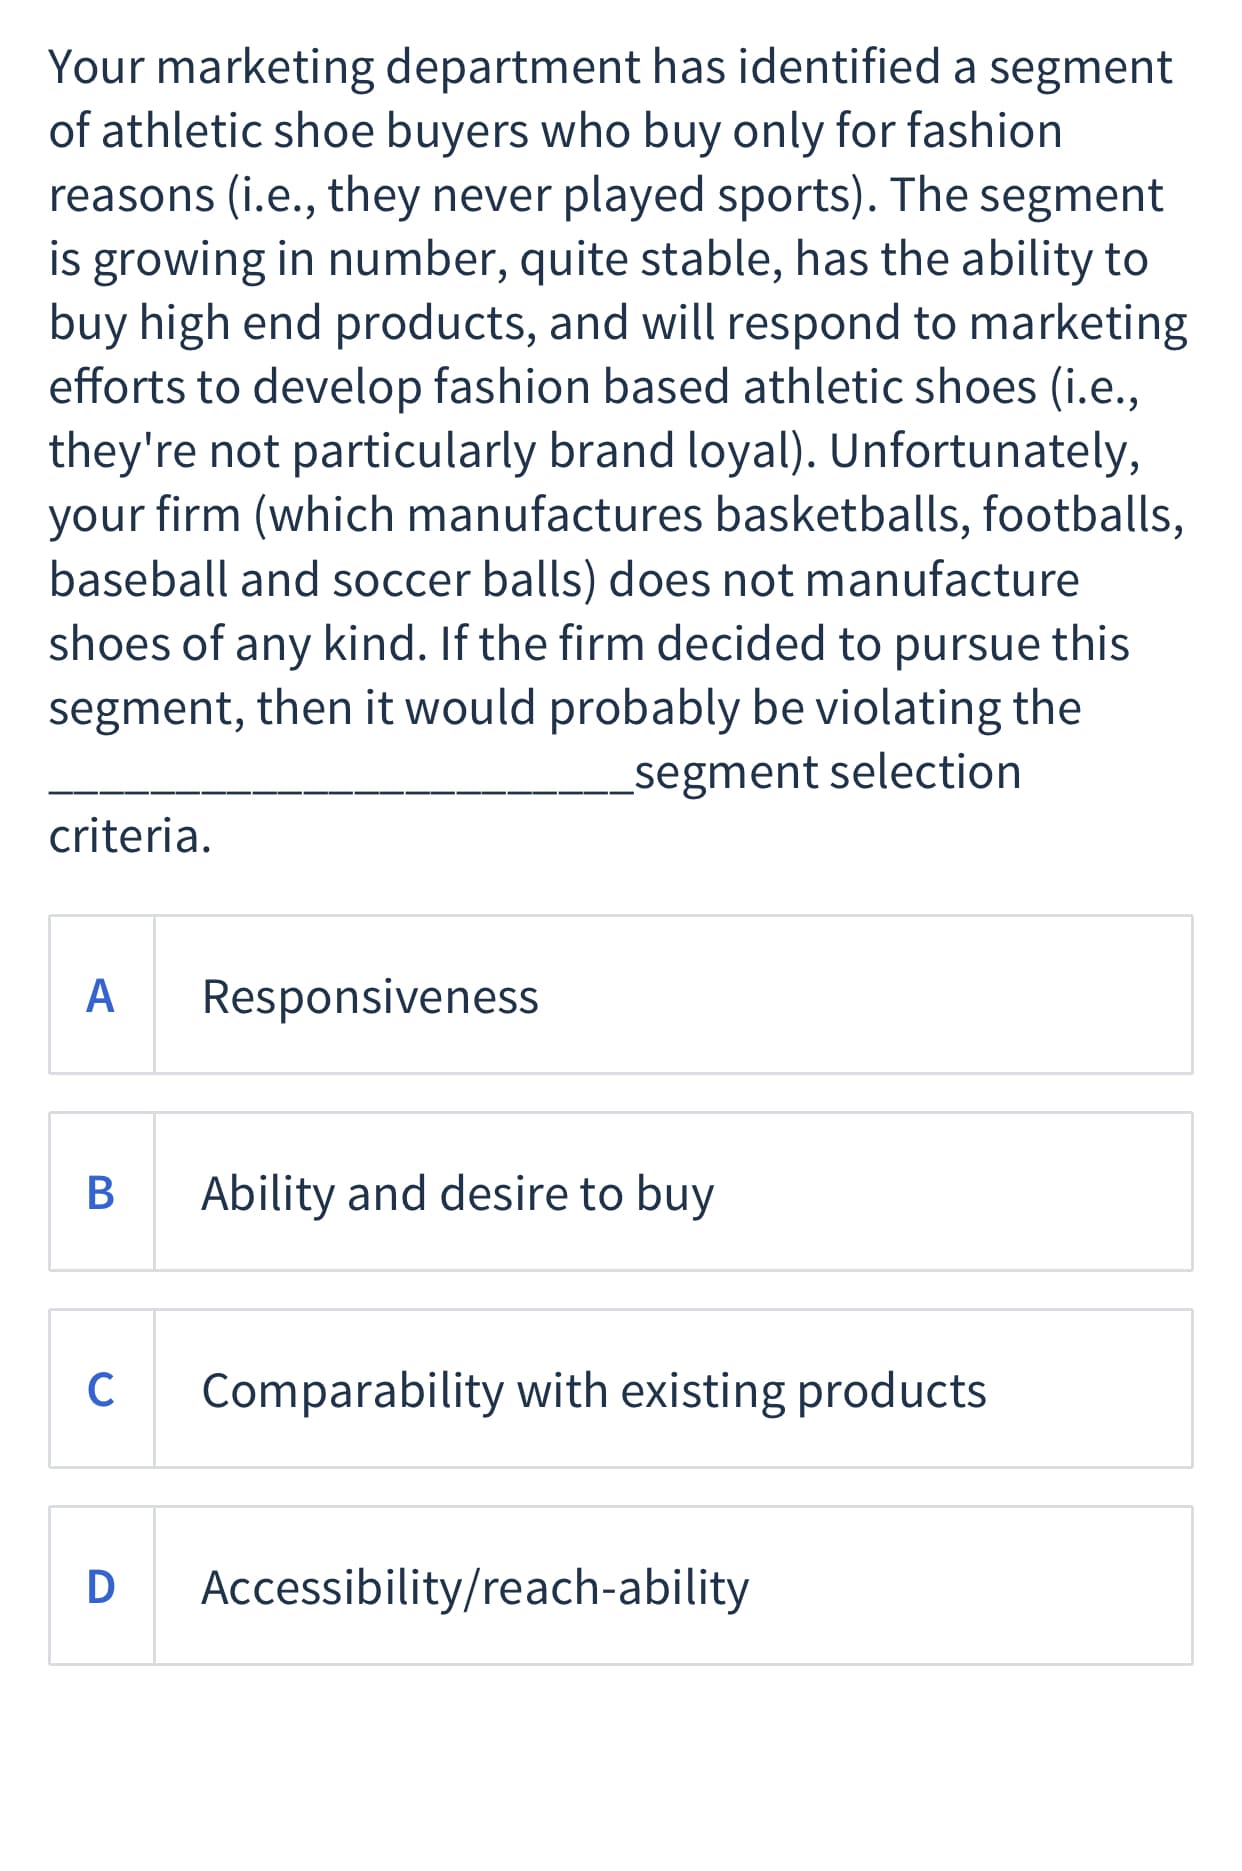 Your marketing department has identified a segment
of athletic shoe buyers who buy only for fashion
reasons (i.e., they never played sports). The segment
is growing in number, quite stable, has the ability to
buy high end products, and will respond to marketing
efforts to develop fashion based athletic shoes (i.e.,
they're not particularly brand loyal). Unfortunately,
your firm (which manufactures basketballs, footballs,
baseball and soccer balls) does not manufacture
shoes of any kind. If the firm decided to pursue this
segment, then it would probably be violating the
segment selection
criteria.
A
Responsiveness
В
Ability and desire to buy
C
Comparability with existing products
Accessibility/reach-ability
